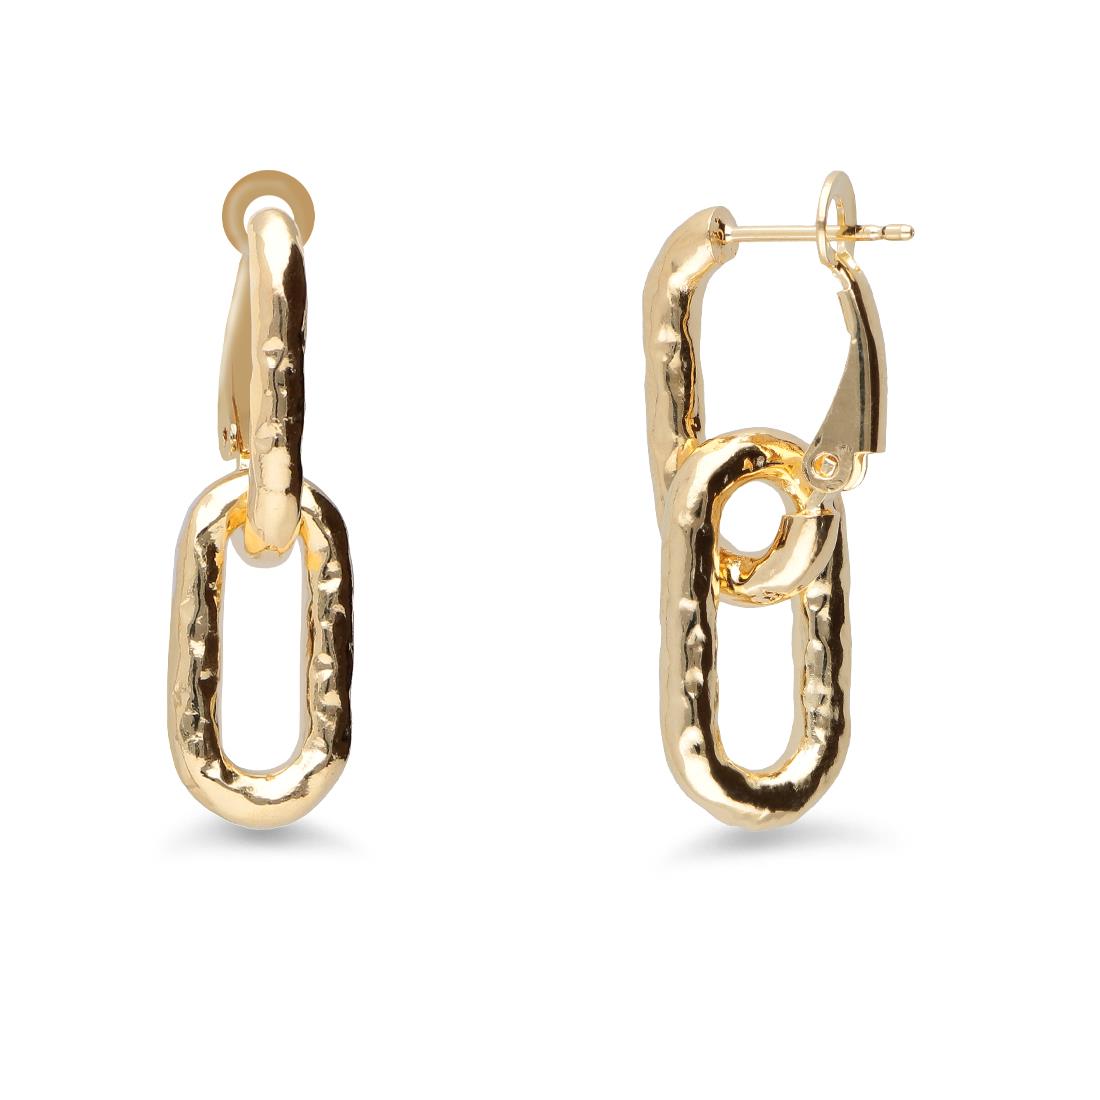 Gold plated earrings - TOSCANA BY ETRUSCA